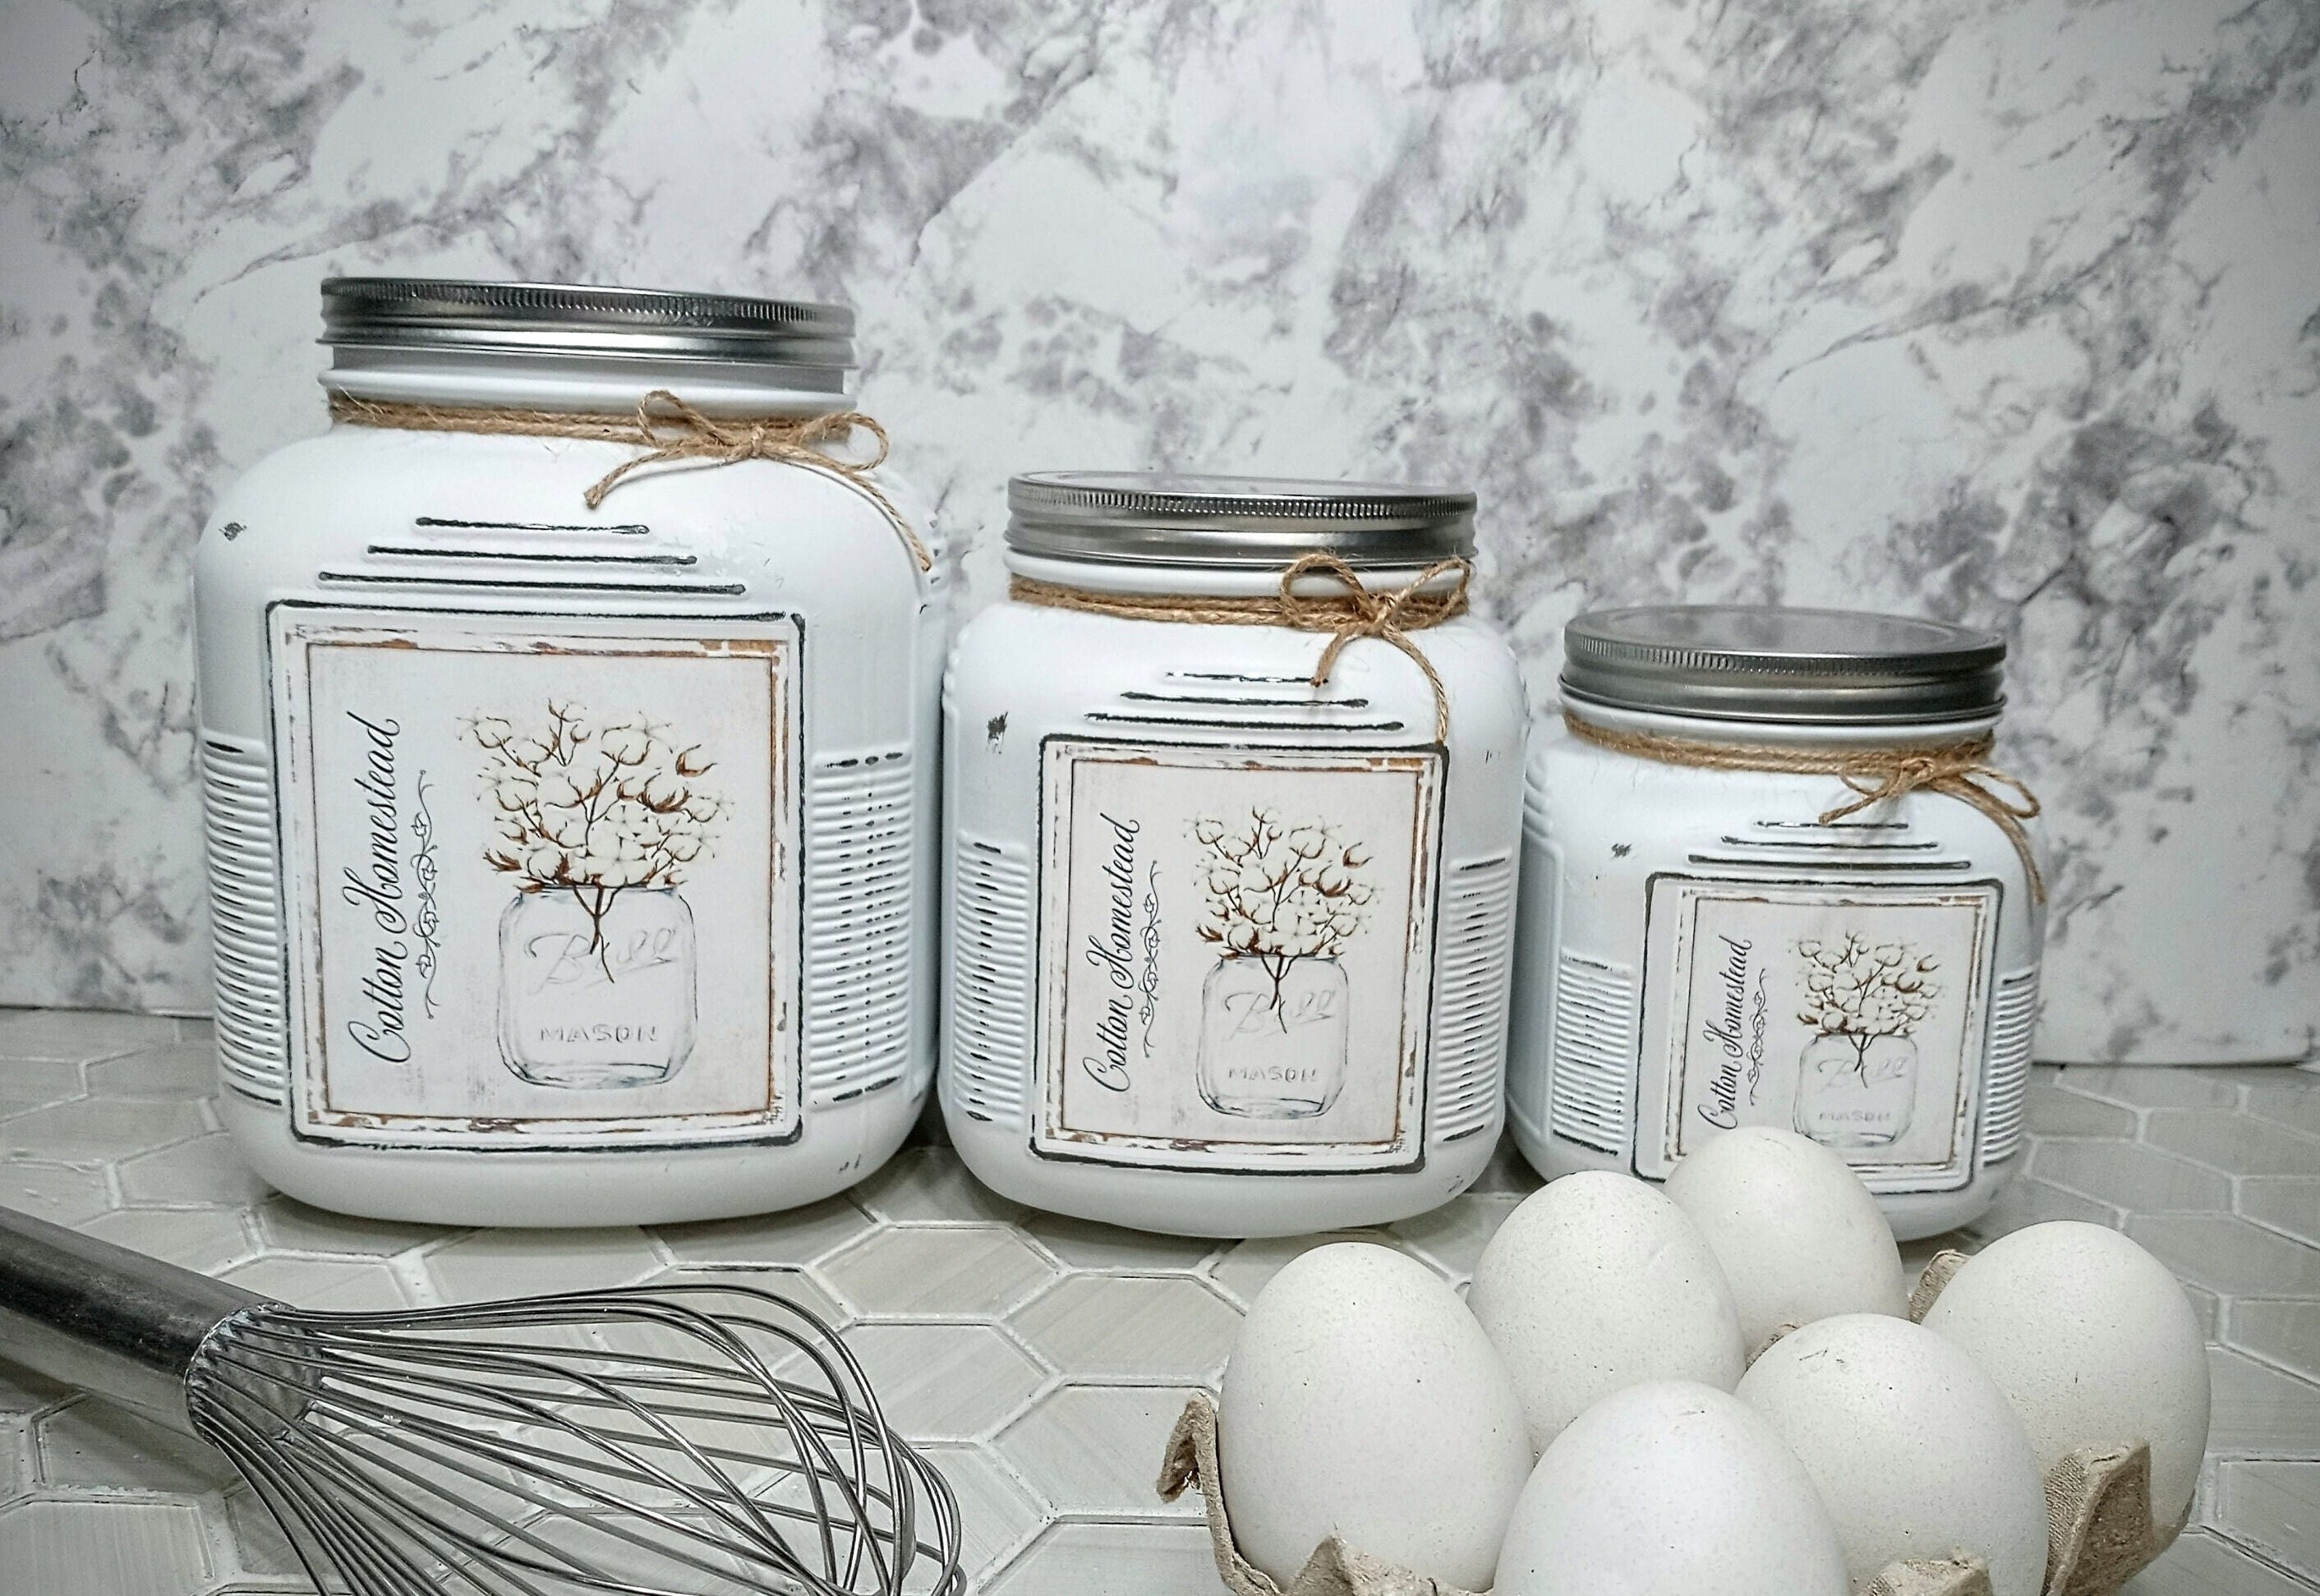 Barnyard Designs Canister Sets for Kitchen Counter Vintage Kitchen  Canisters, Country Rustic Farmhouse Decor for the Kitchen, Coffee Tea Sugar  Flour Farmhouse Kitchen Decor, Metal, Mint, Set of 4 